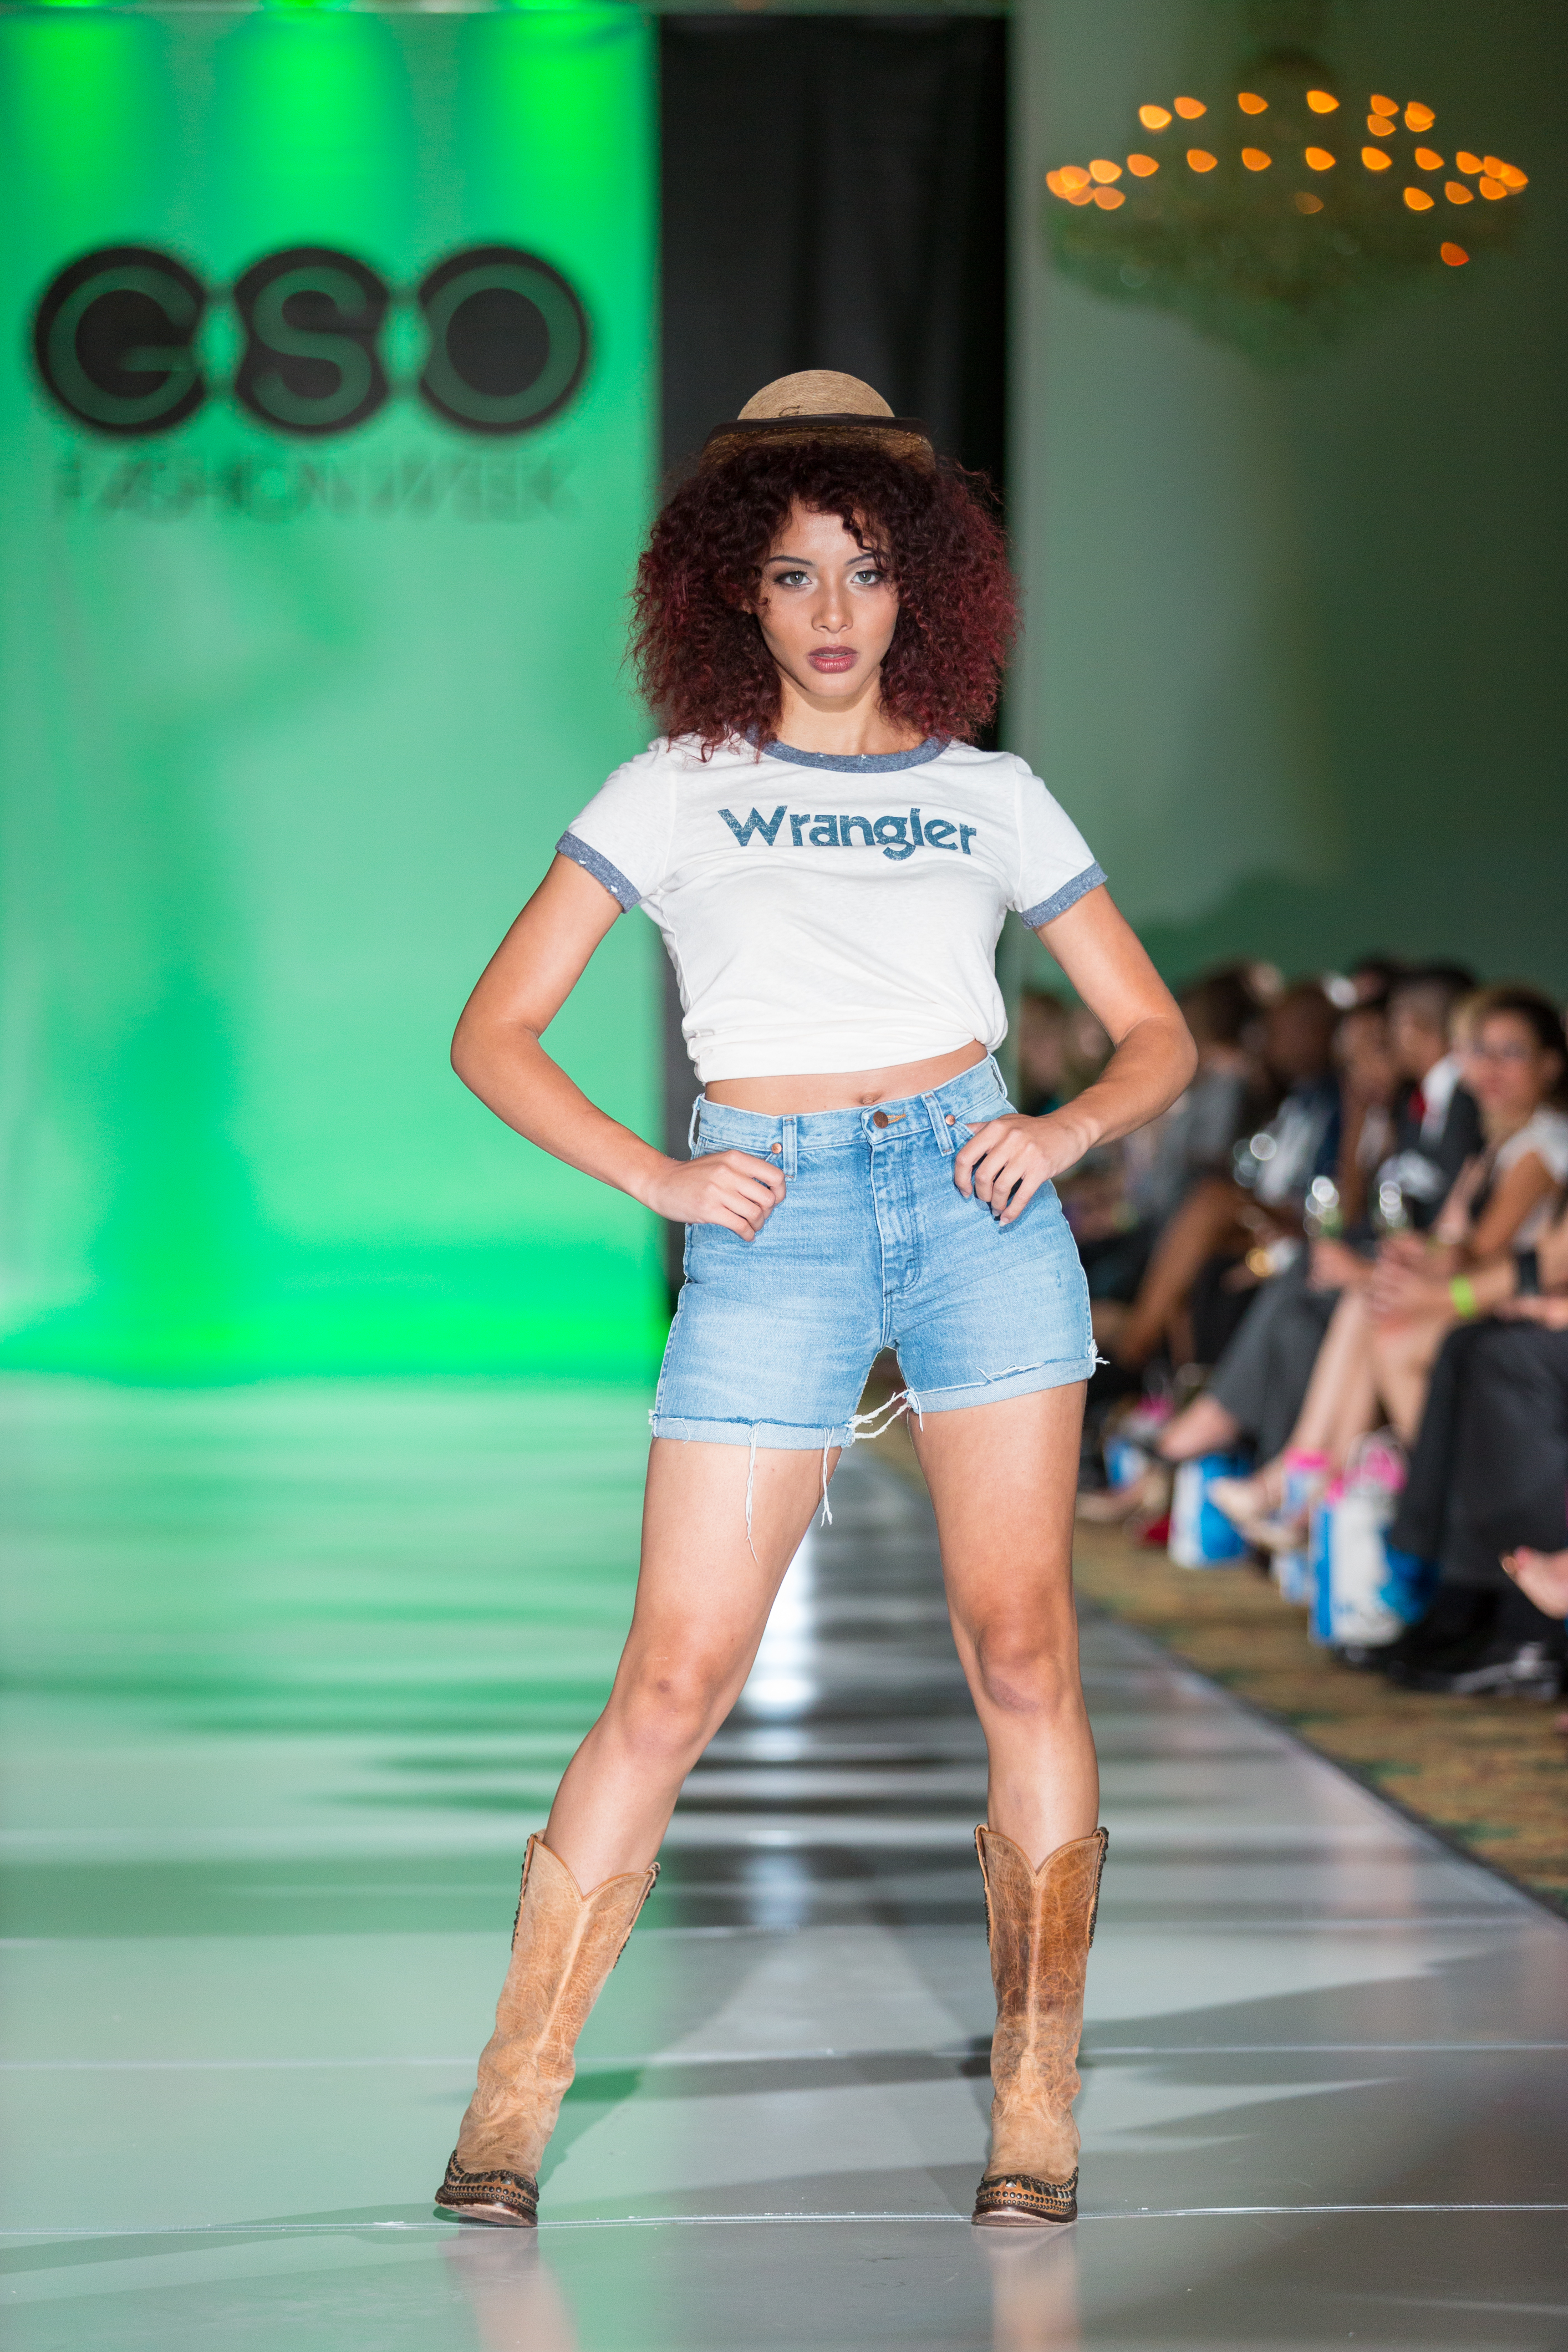 Designers Showcase Vintage-Inspired Wrangler® Styles on the Runway |  Business Wire